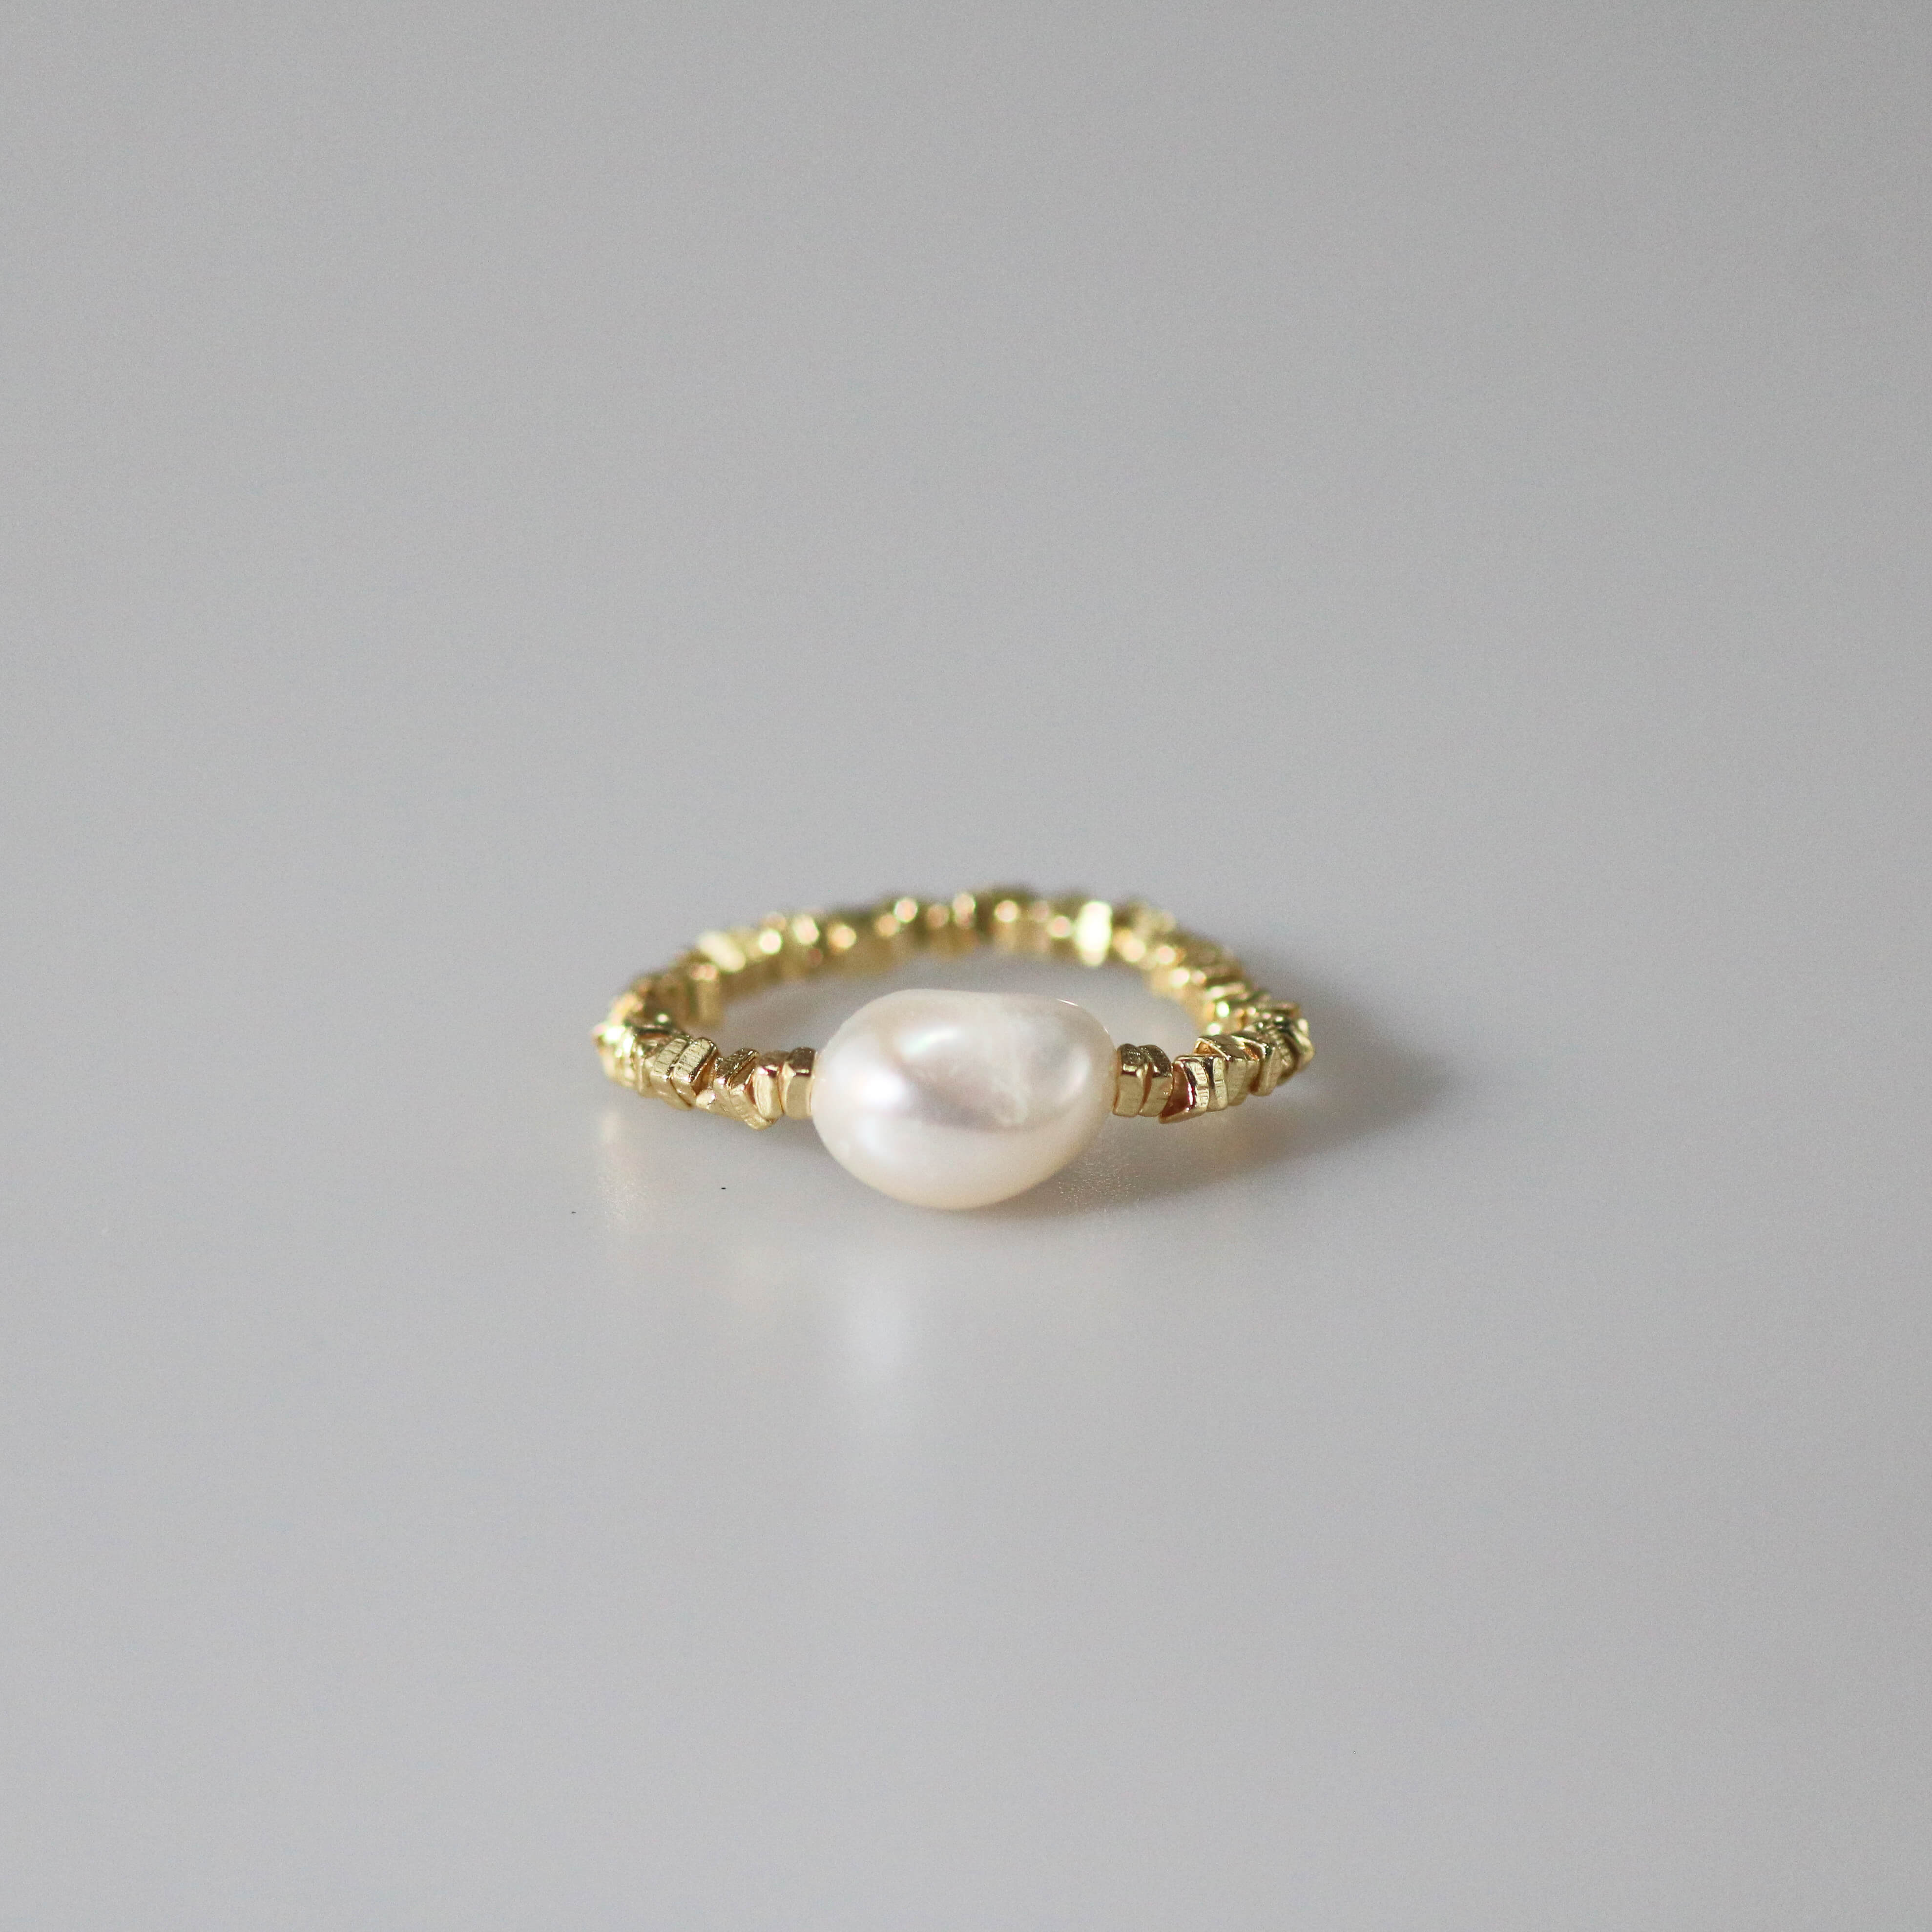 Meideya Jewelry Pearl and Gold beads stretchy ring